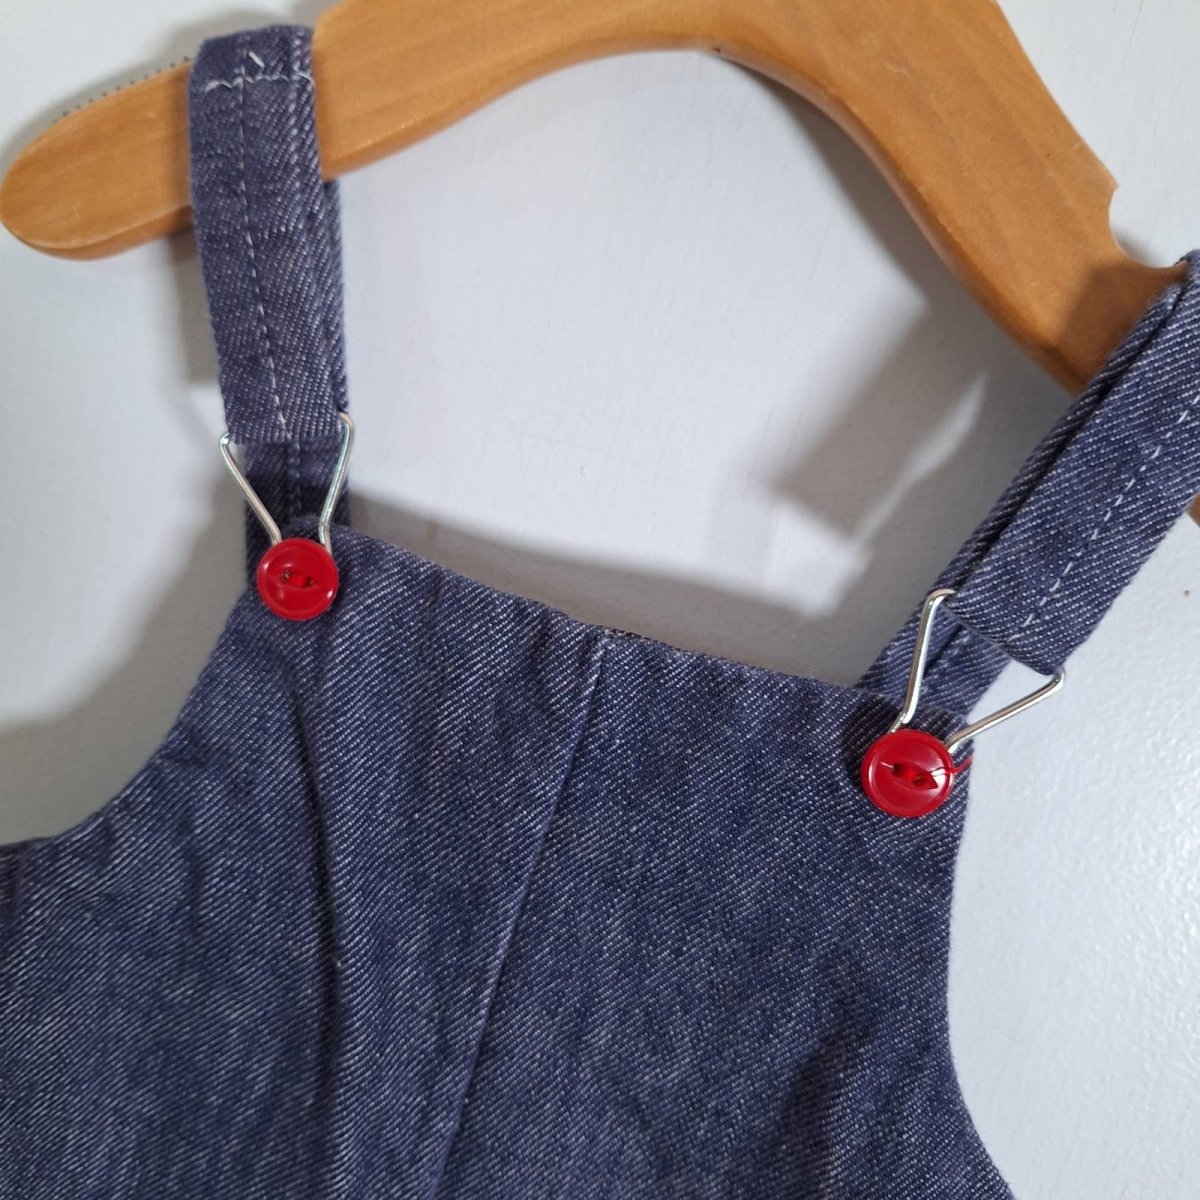 Vintage 70s Infant/Toddler Denim Overalls Unisex Size UP TO 18 Months - themallvintage The Mall Vintage